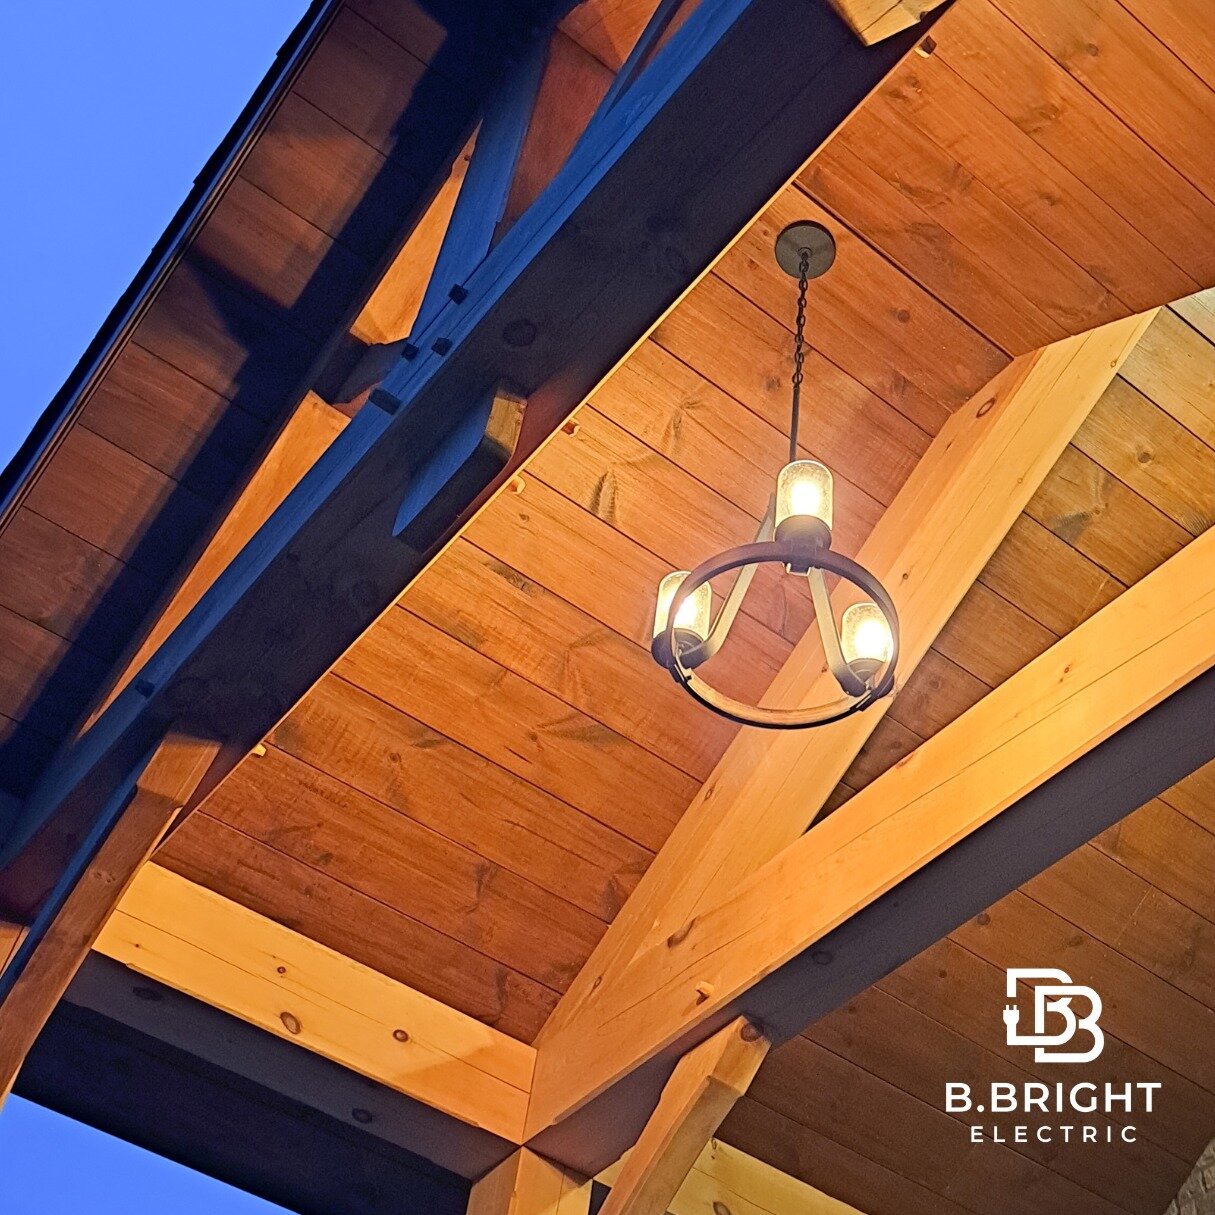 Lighting layout and design is a great way to increase property value, extend living spaces and ensure safety. Whether it is soffit lighting or landscape lighting, deck lights or under cabinet lights. We create a unique design that is custom to your n